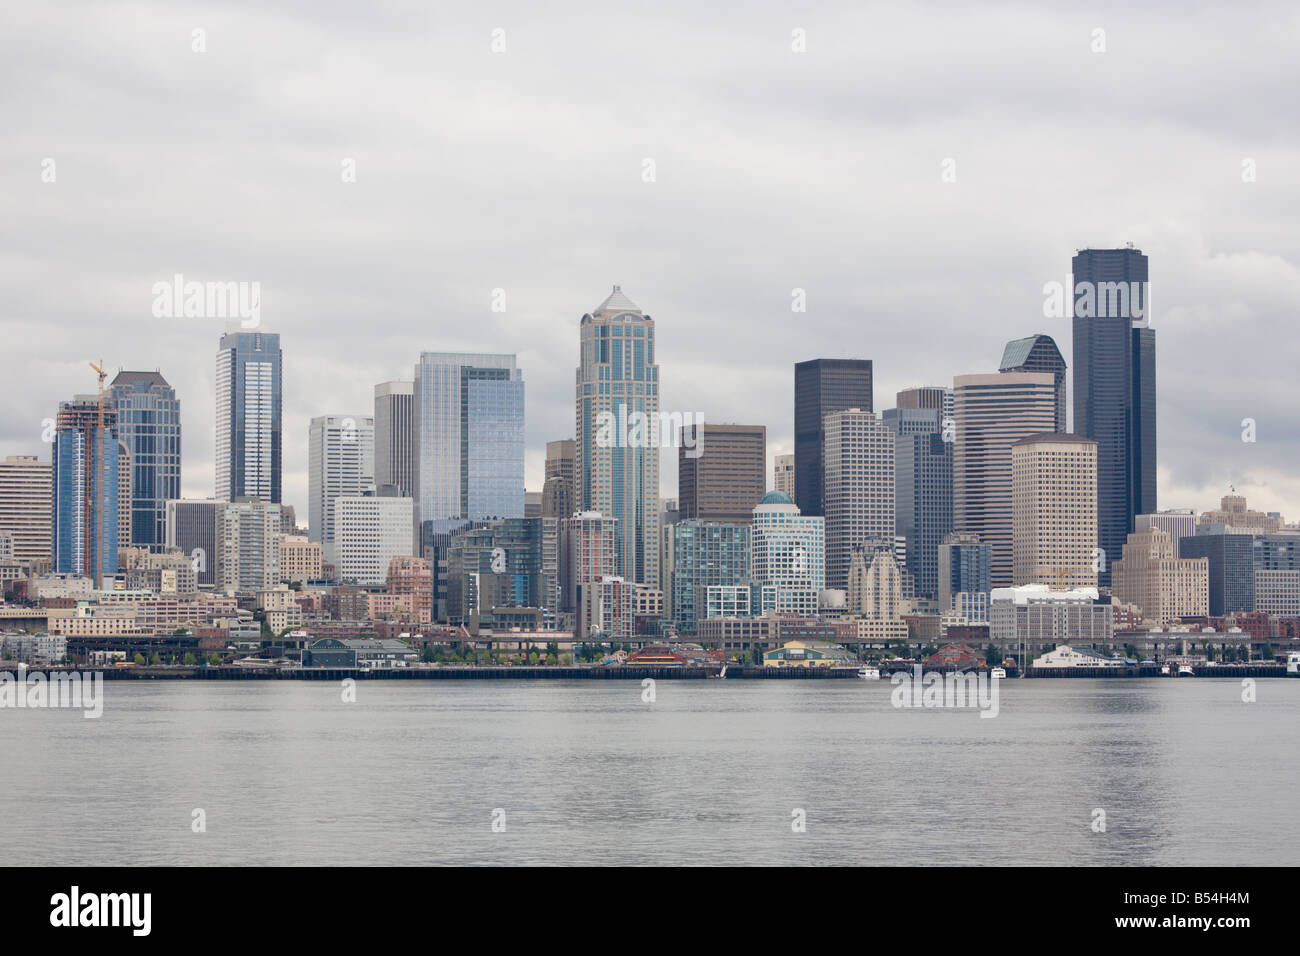 Downtown Seattle Washington skyline on a typical cloudy day from Elliot Bay in Puget Sound Stock Photo